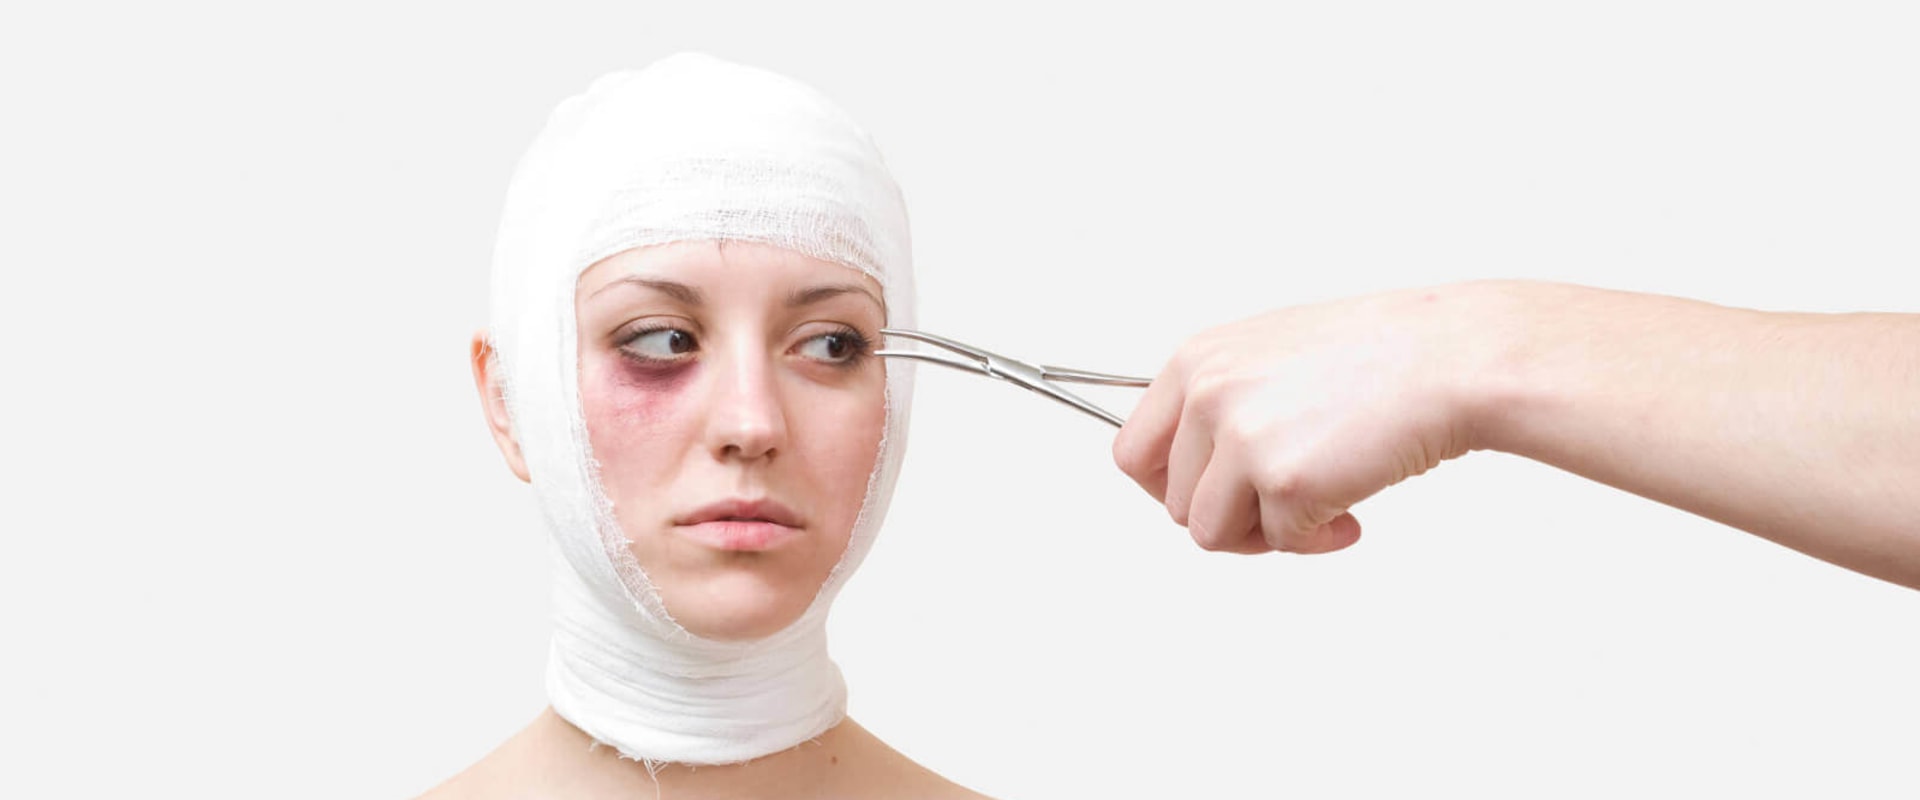 The Impact of Cosmetic Surgery on Society